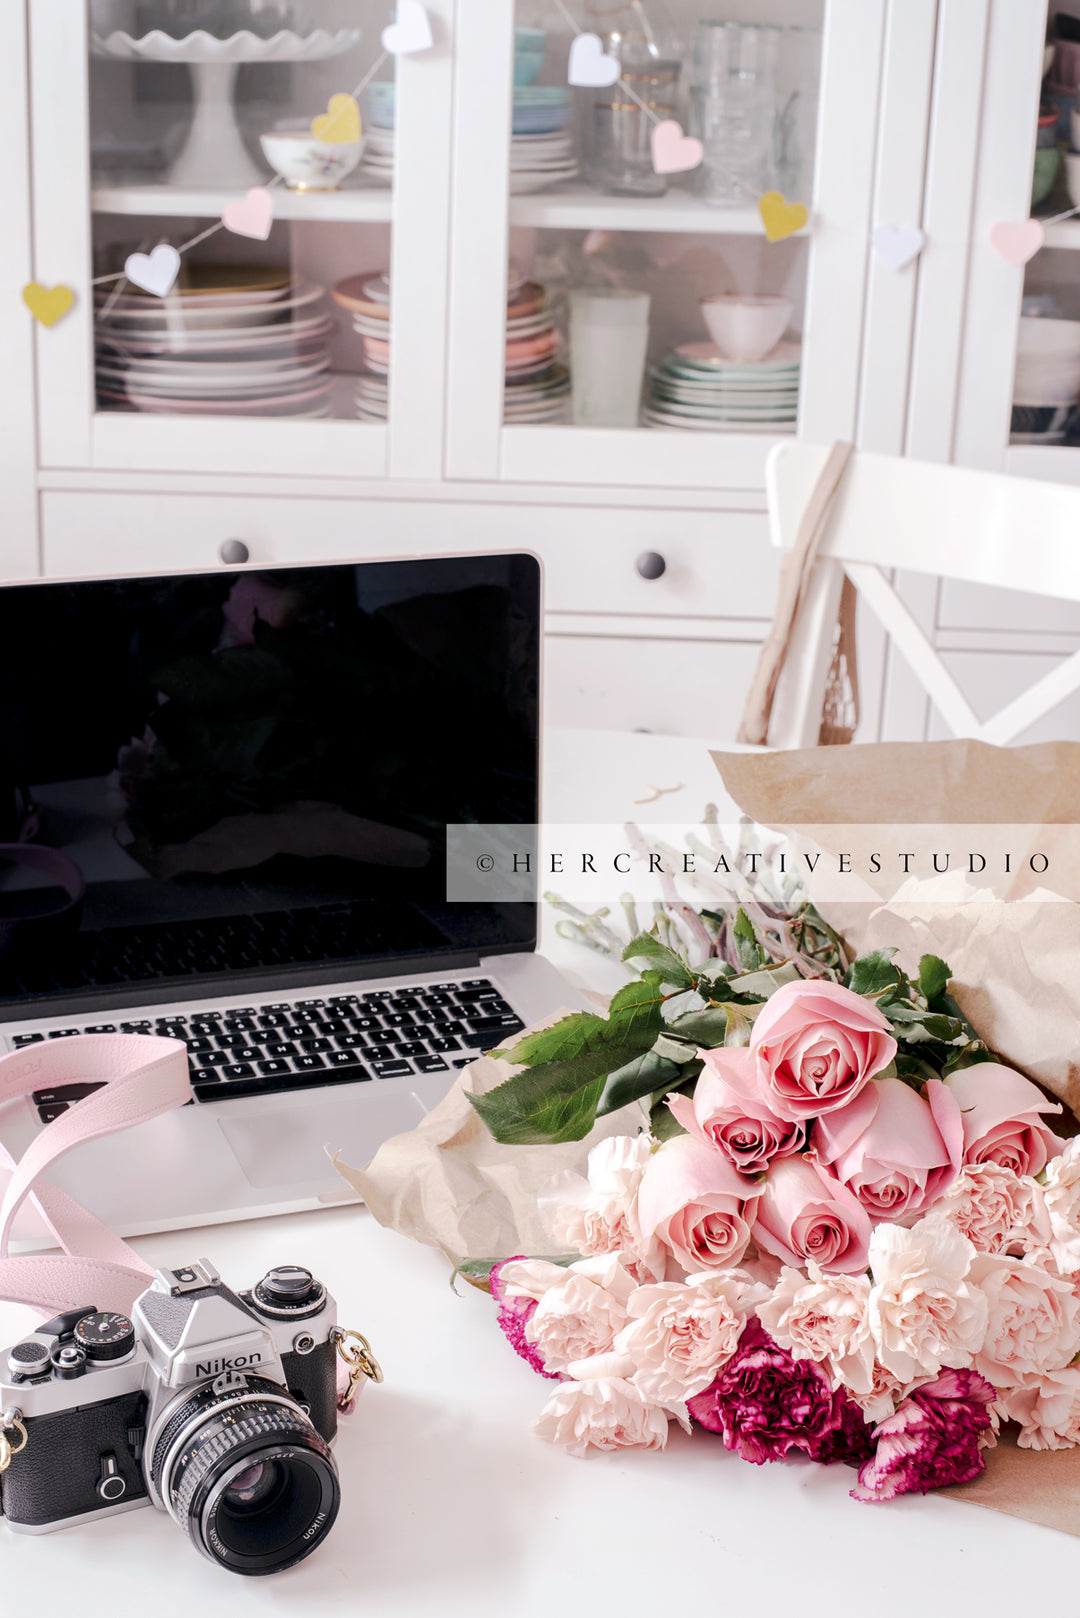 Camera, Laptop and Roses on White Table, Styled Stock Image